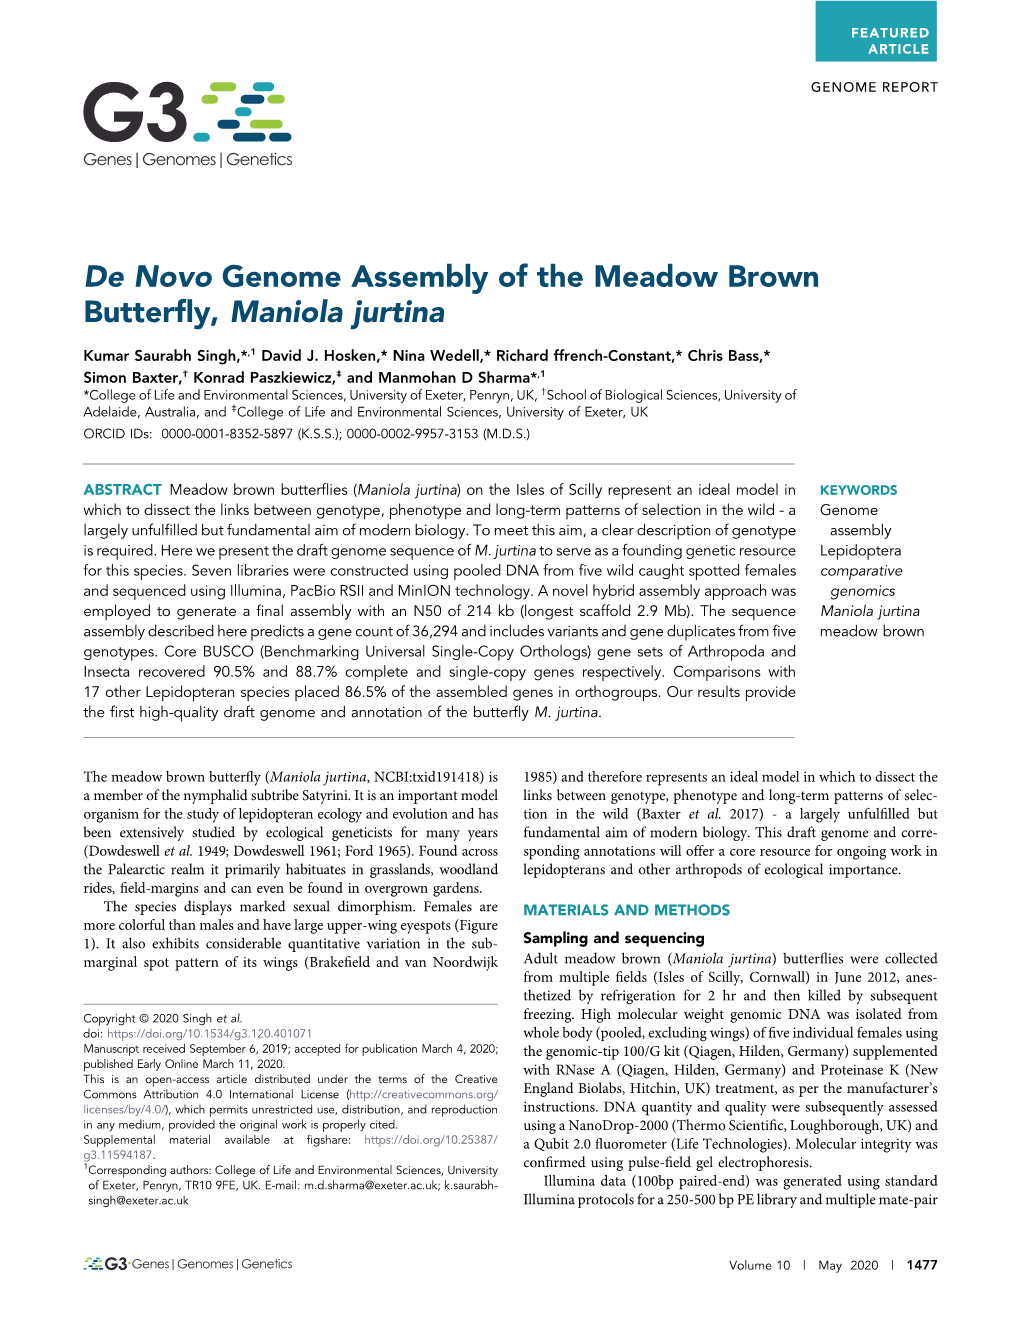 De Novo Genome Assembly of the Meadow Brown Butterﬂy, Maniola Jurtina